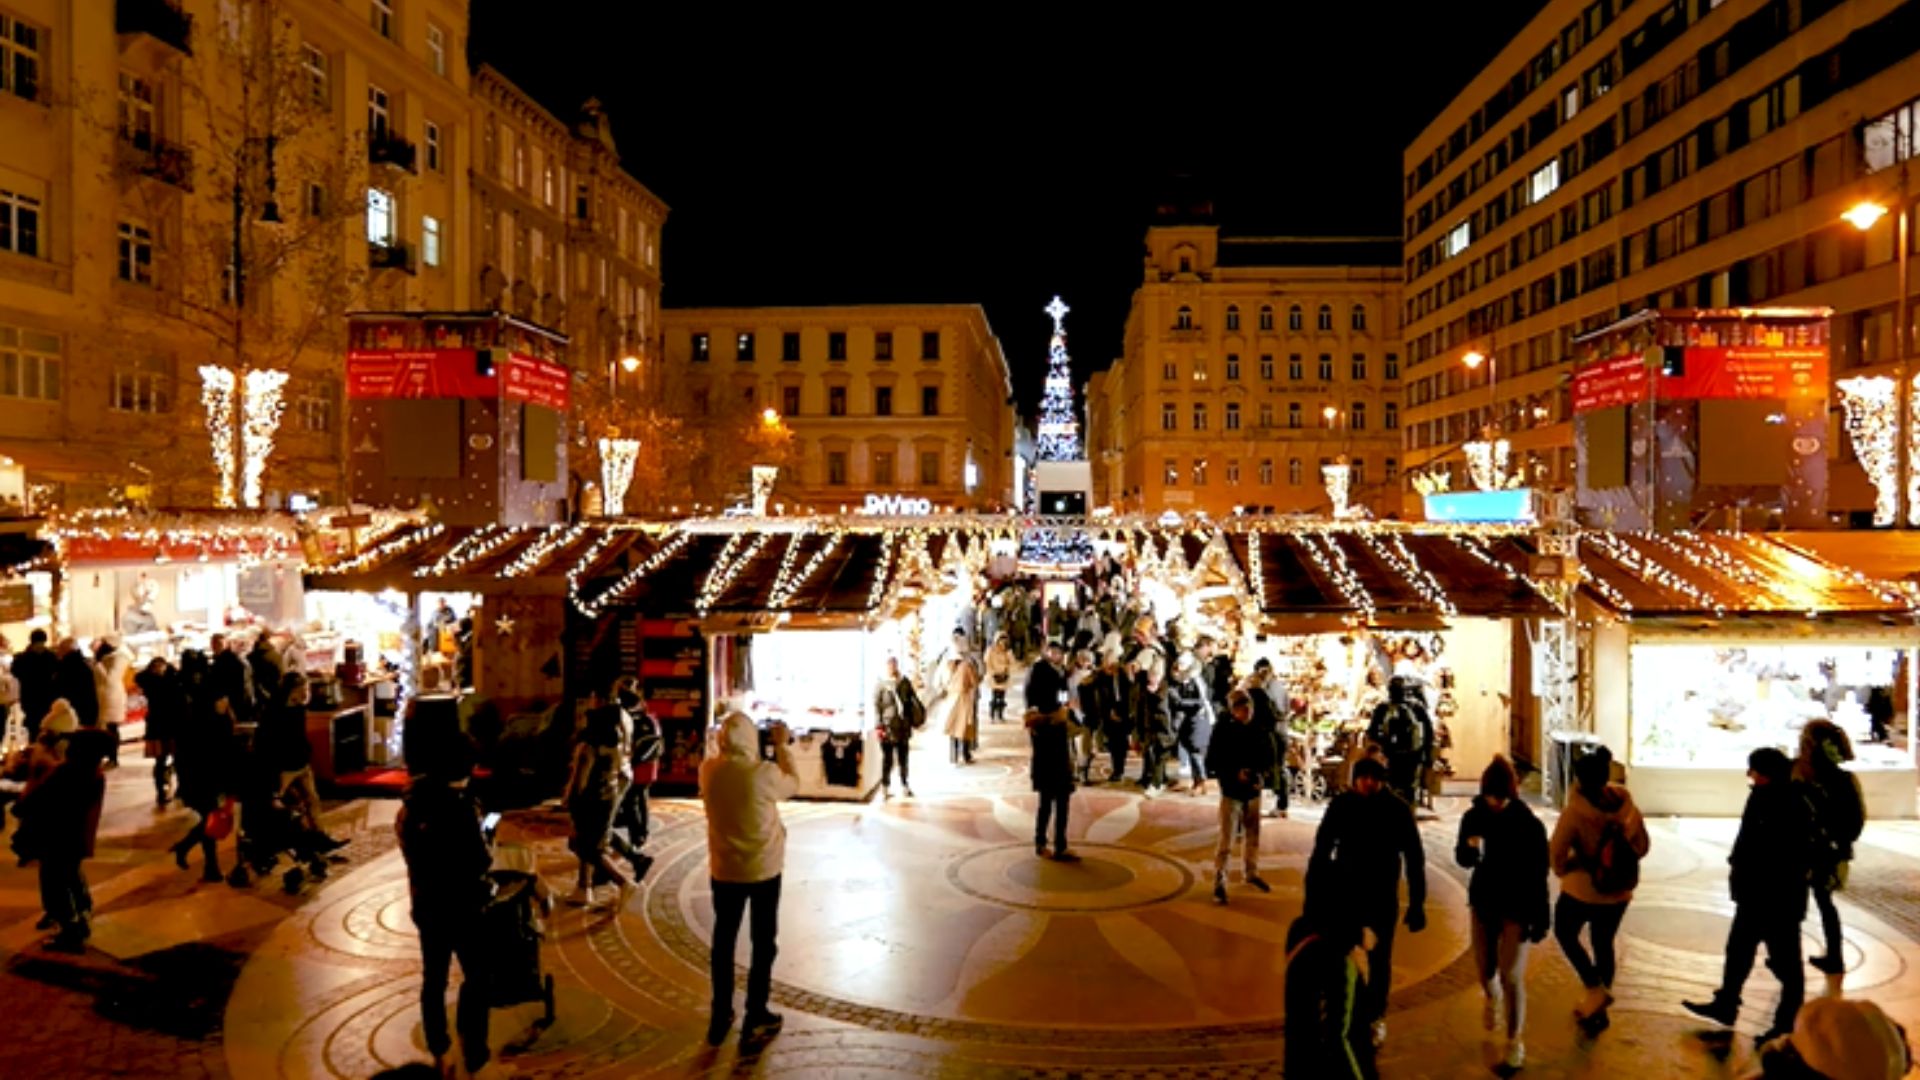 Inflation has become the Grinch at Budapest's Christmas markets. /CGTN